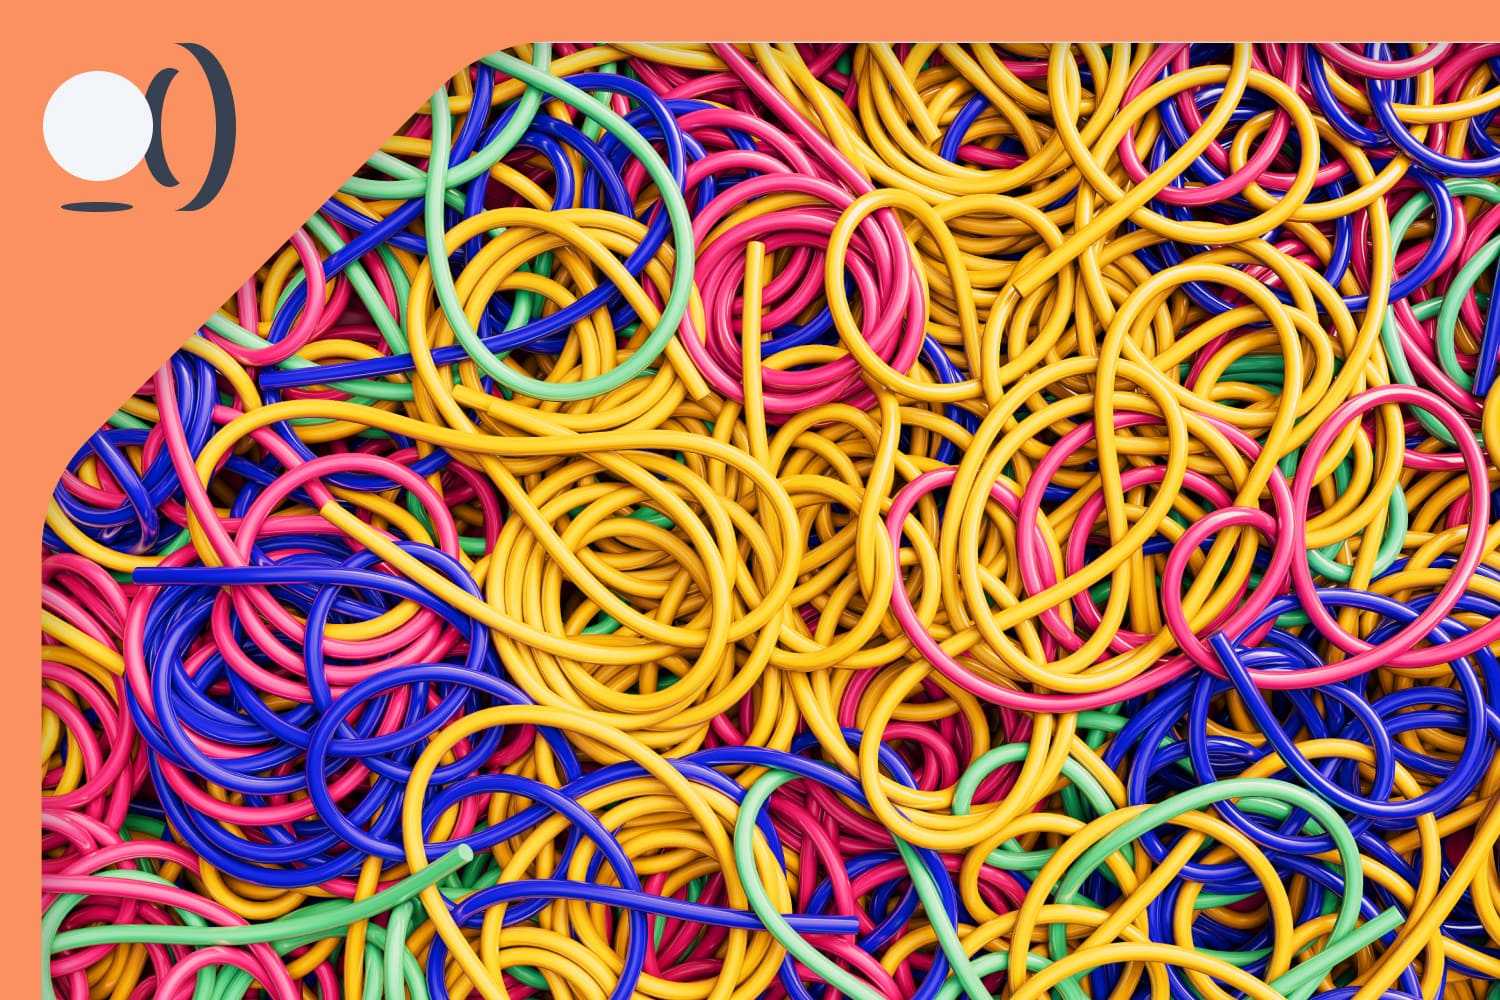 Tangled rubber bands